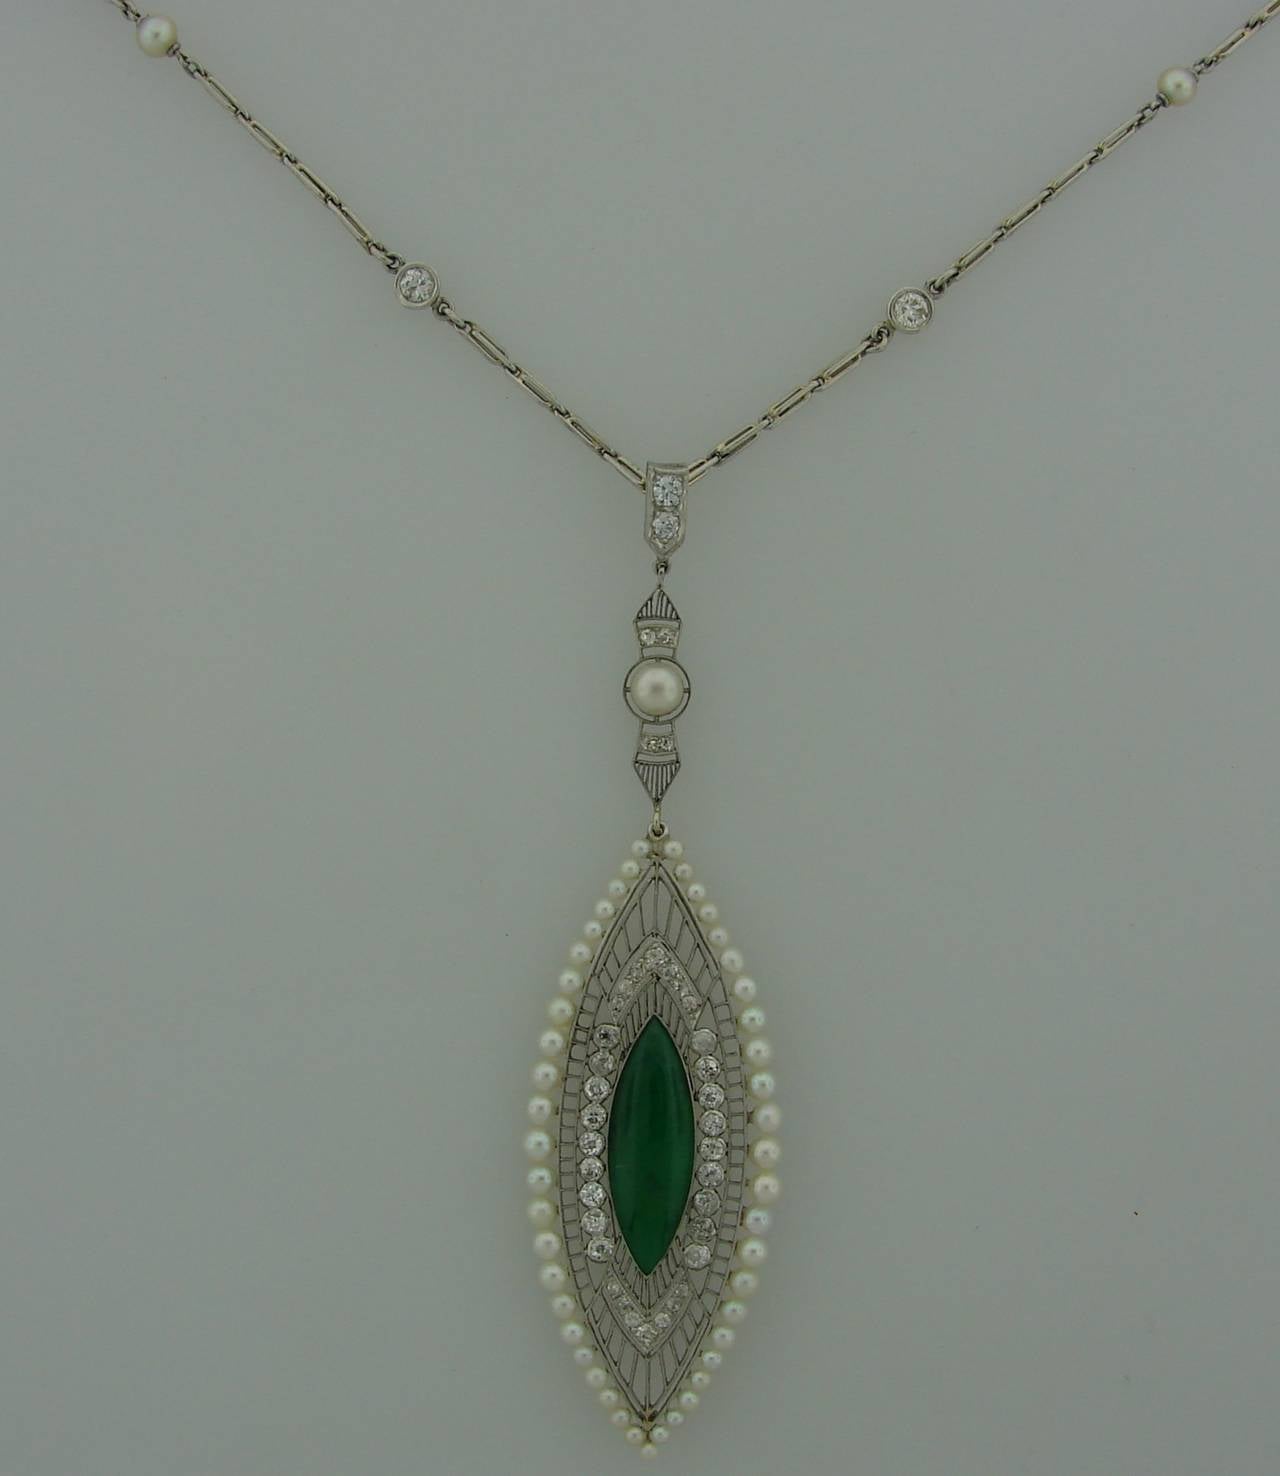 Gorgeous Belle Époque pendant created by Kreisler & Co. in New York. Features a marquise shape jade set in platinum and surrounded with old mine and Old European cut diamonds and graduating pearls. The pendant is attached to a platinum chain set